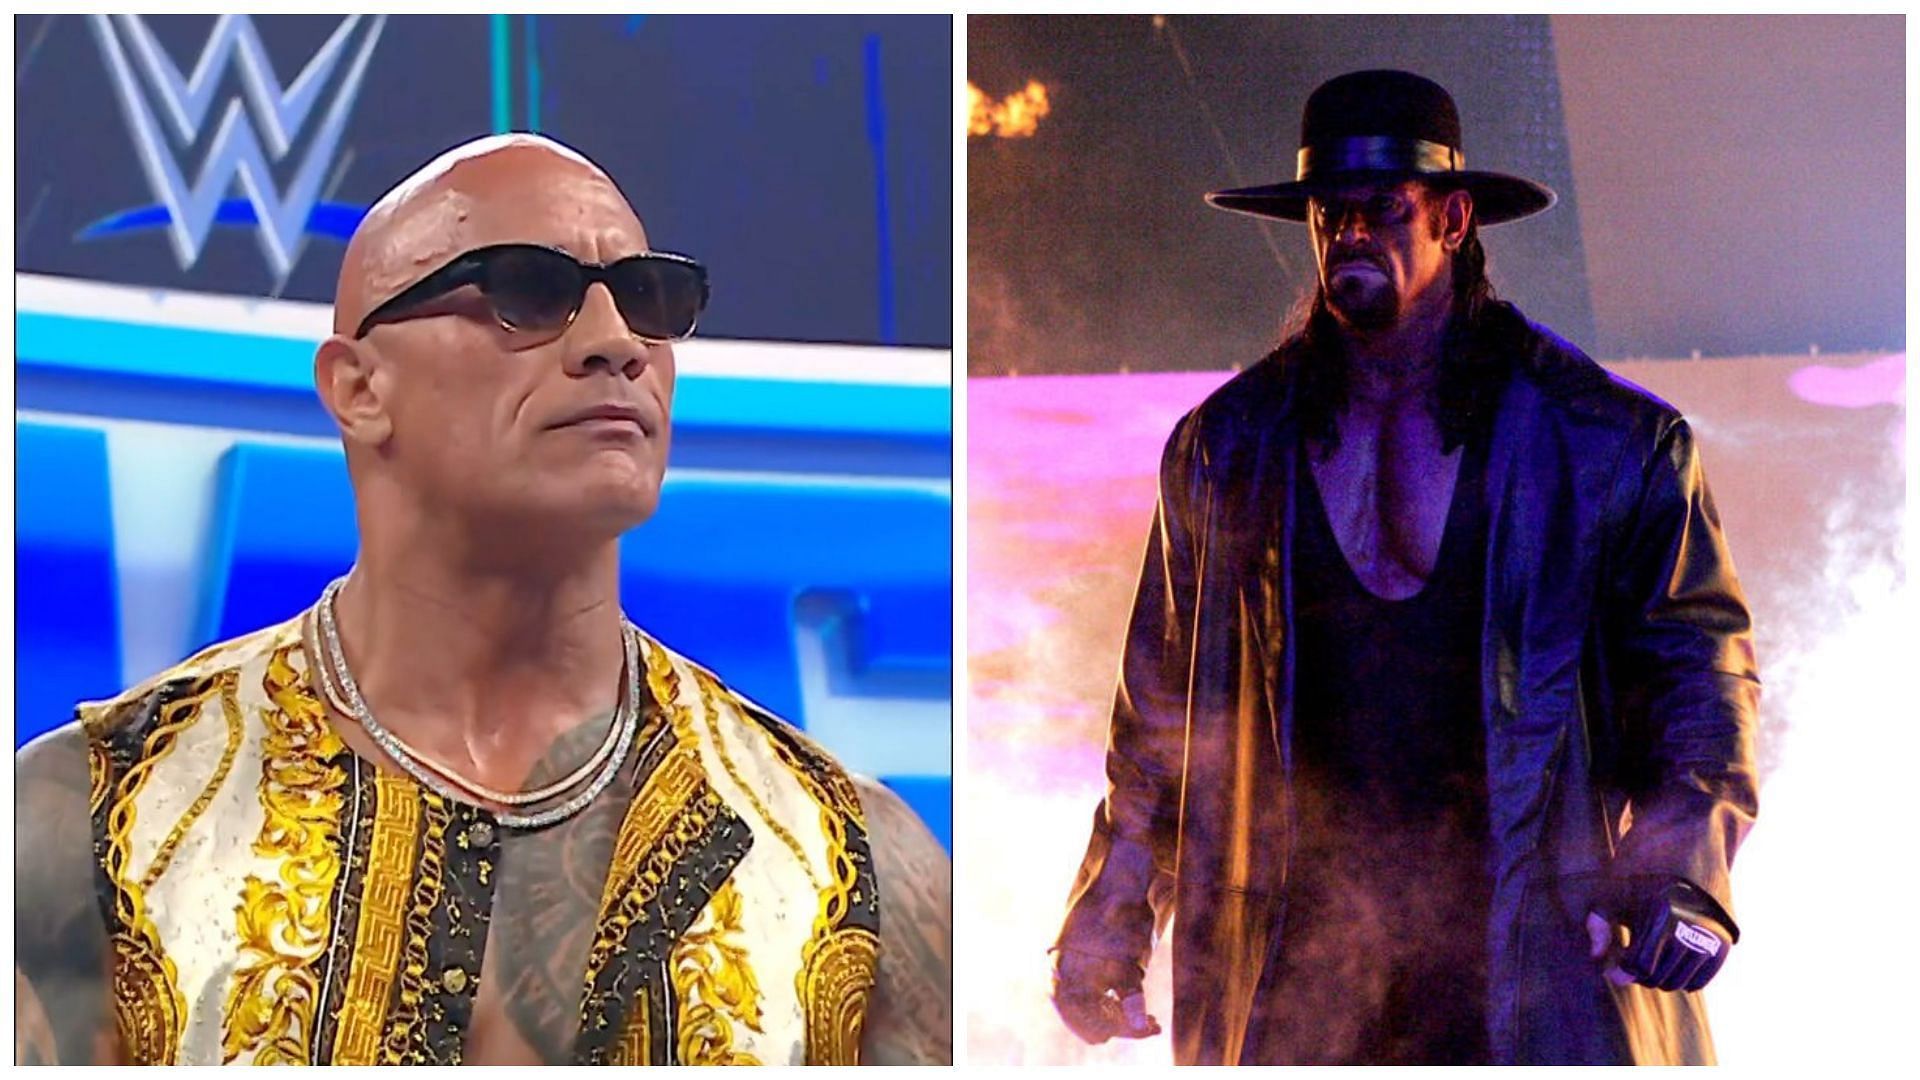 The Rock (left) and The Undertaker (right).